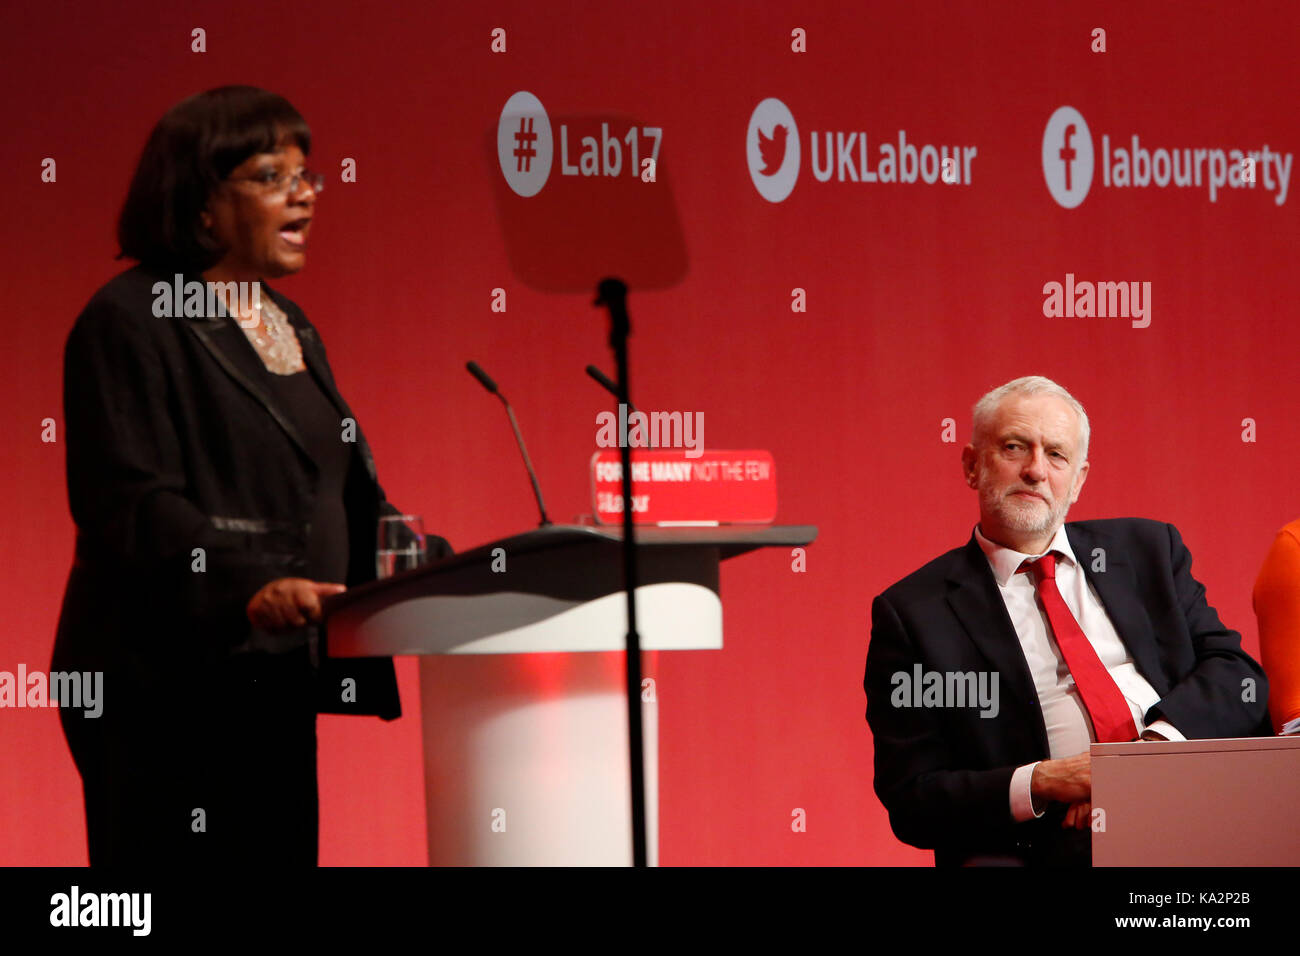 Brighton, UK. 24th September, 2017. Jeremy Corbyn, leader of Britain's opposition Labour party listens to Diane Abbott, Shadow Home Secretary, as she makes a speech during the annual Labour Party Conference in Brighton, UK Sunday, September 24, 2017. Photograph : Credit: Luke MacGregor/Alamy Live News Stock Photo